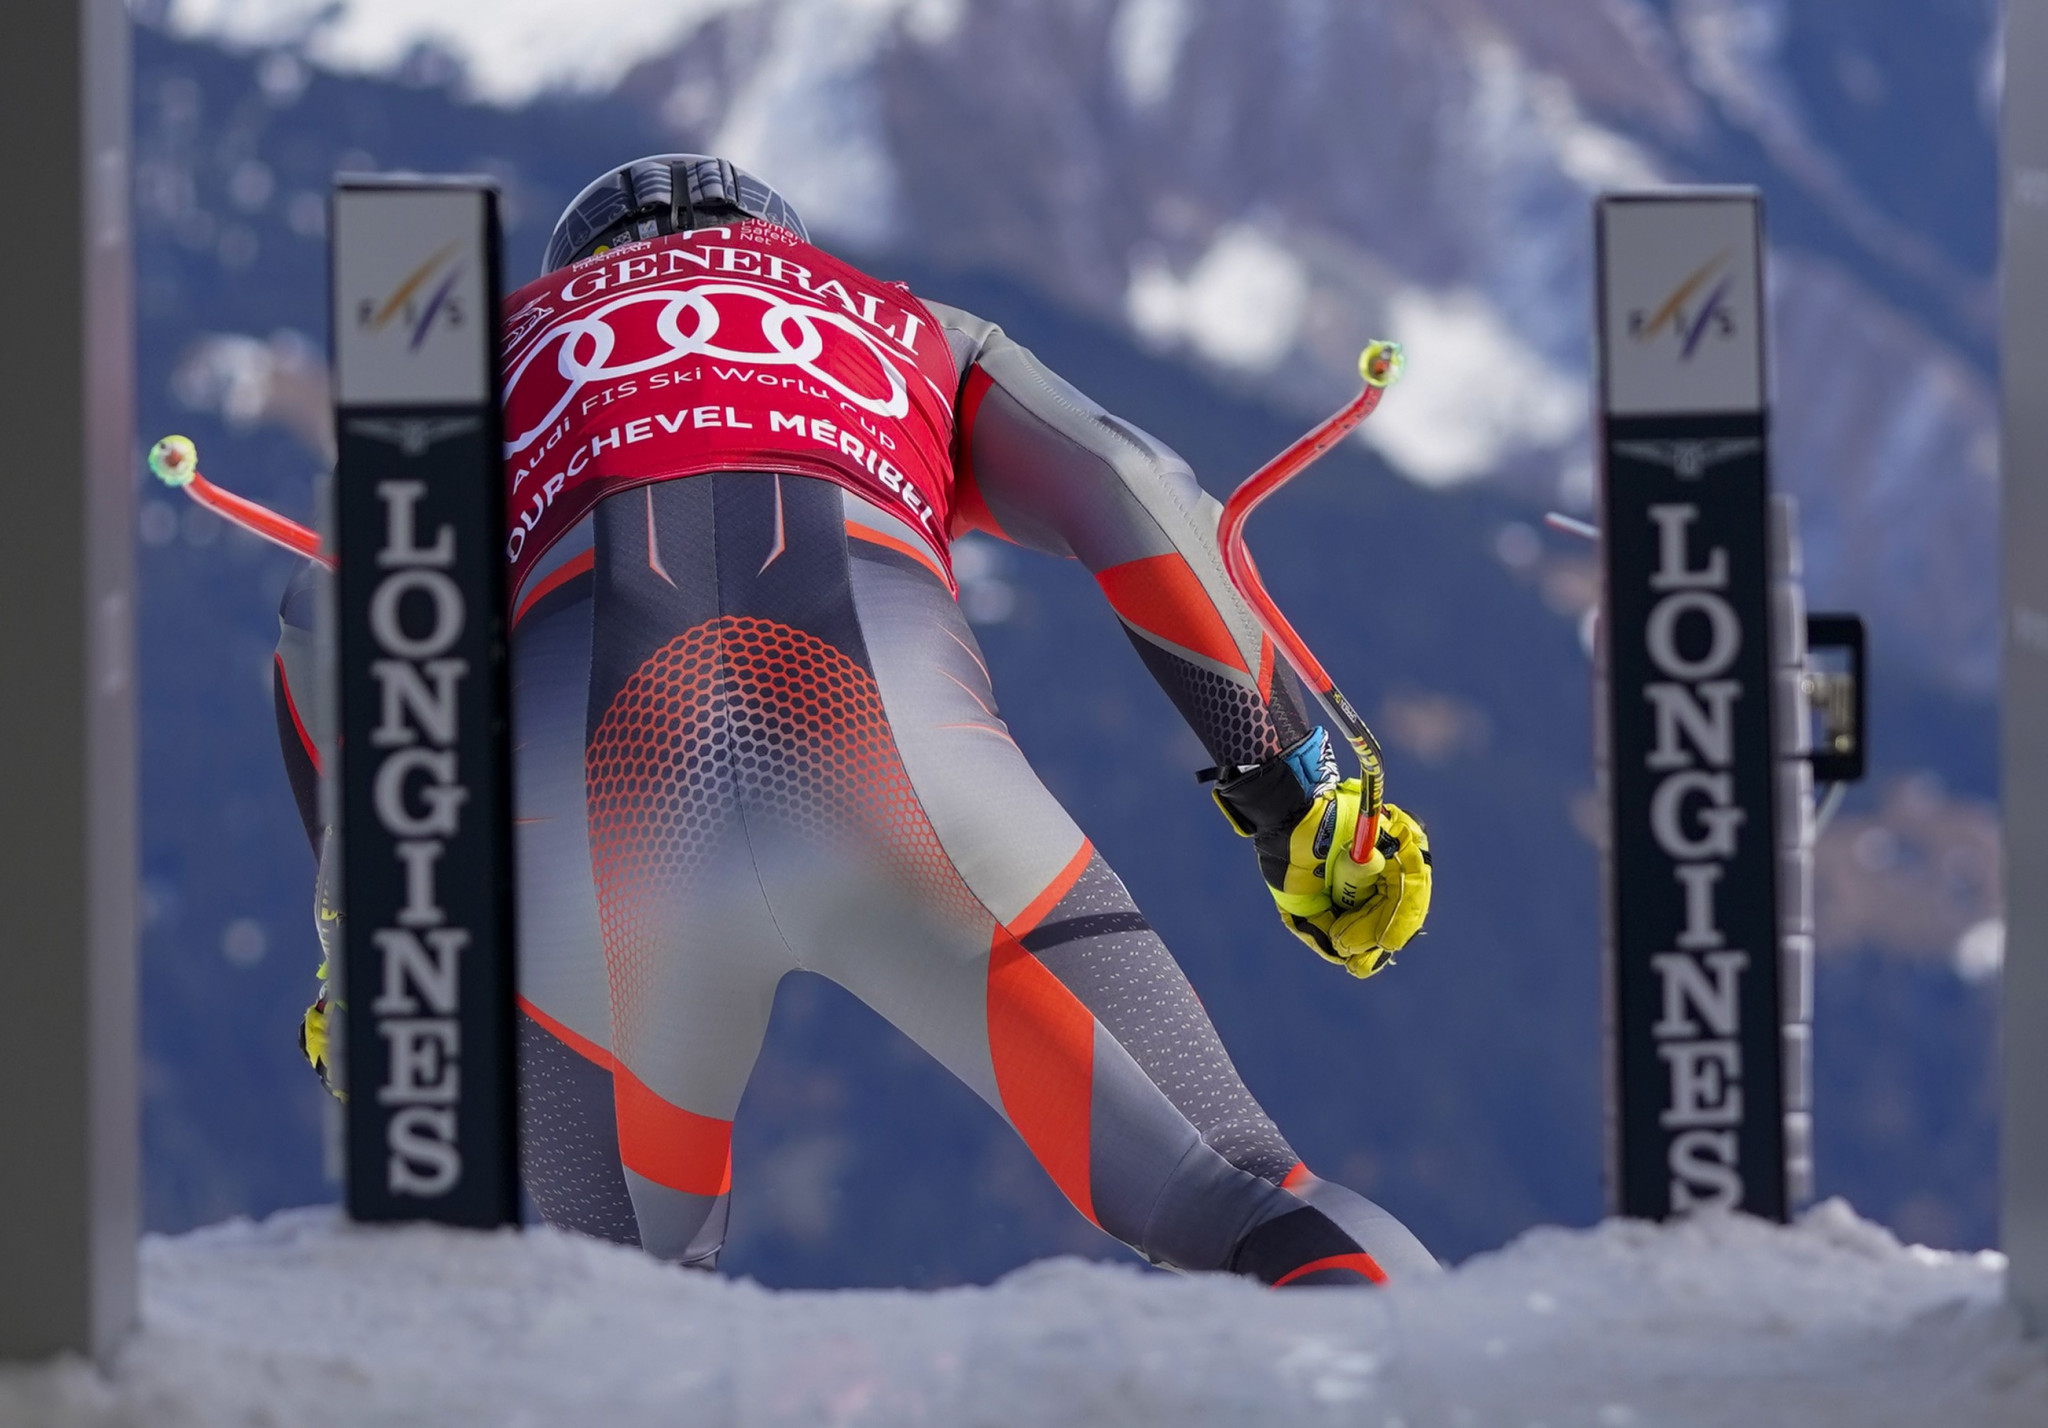 Four candidates hope to win 2027 Alpine World Ski Championships hosting rights at FIS Congress